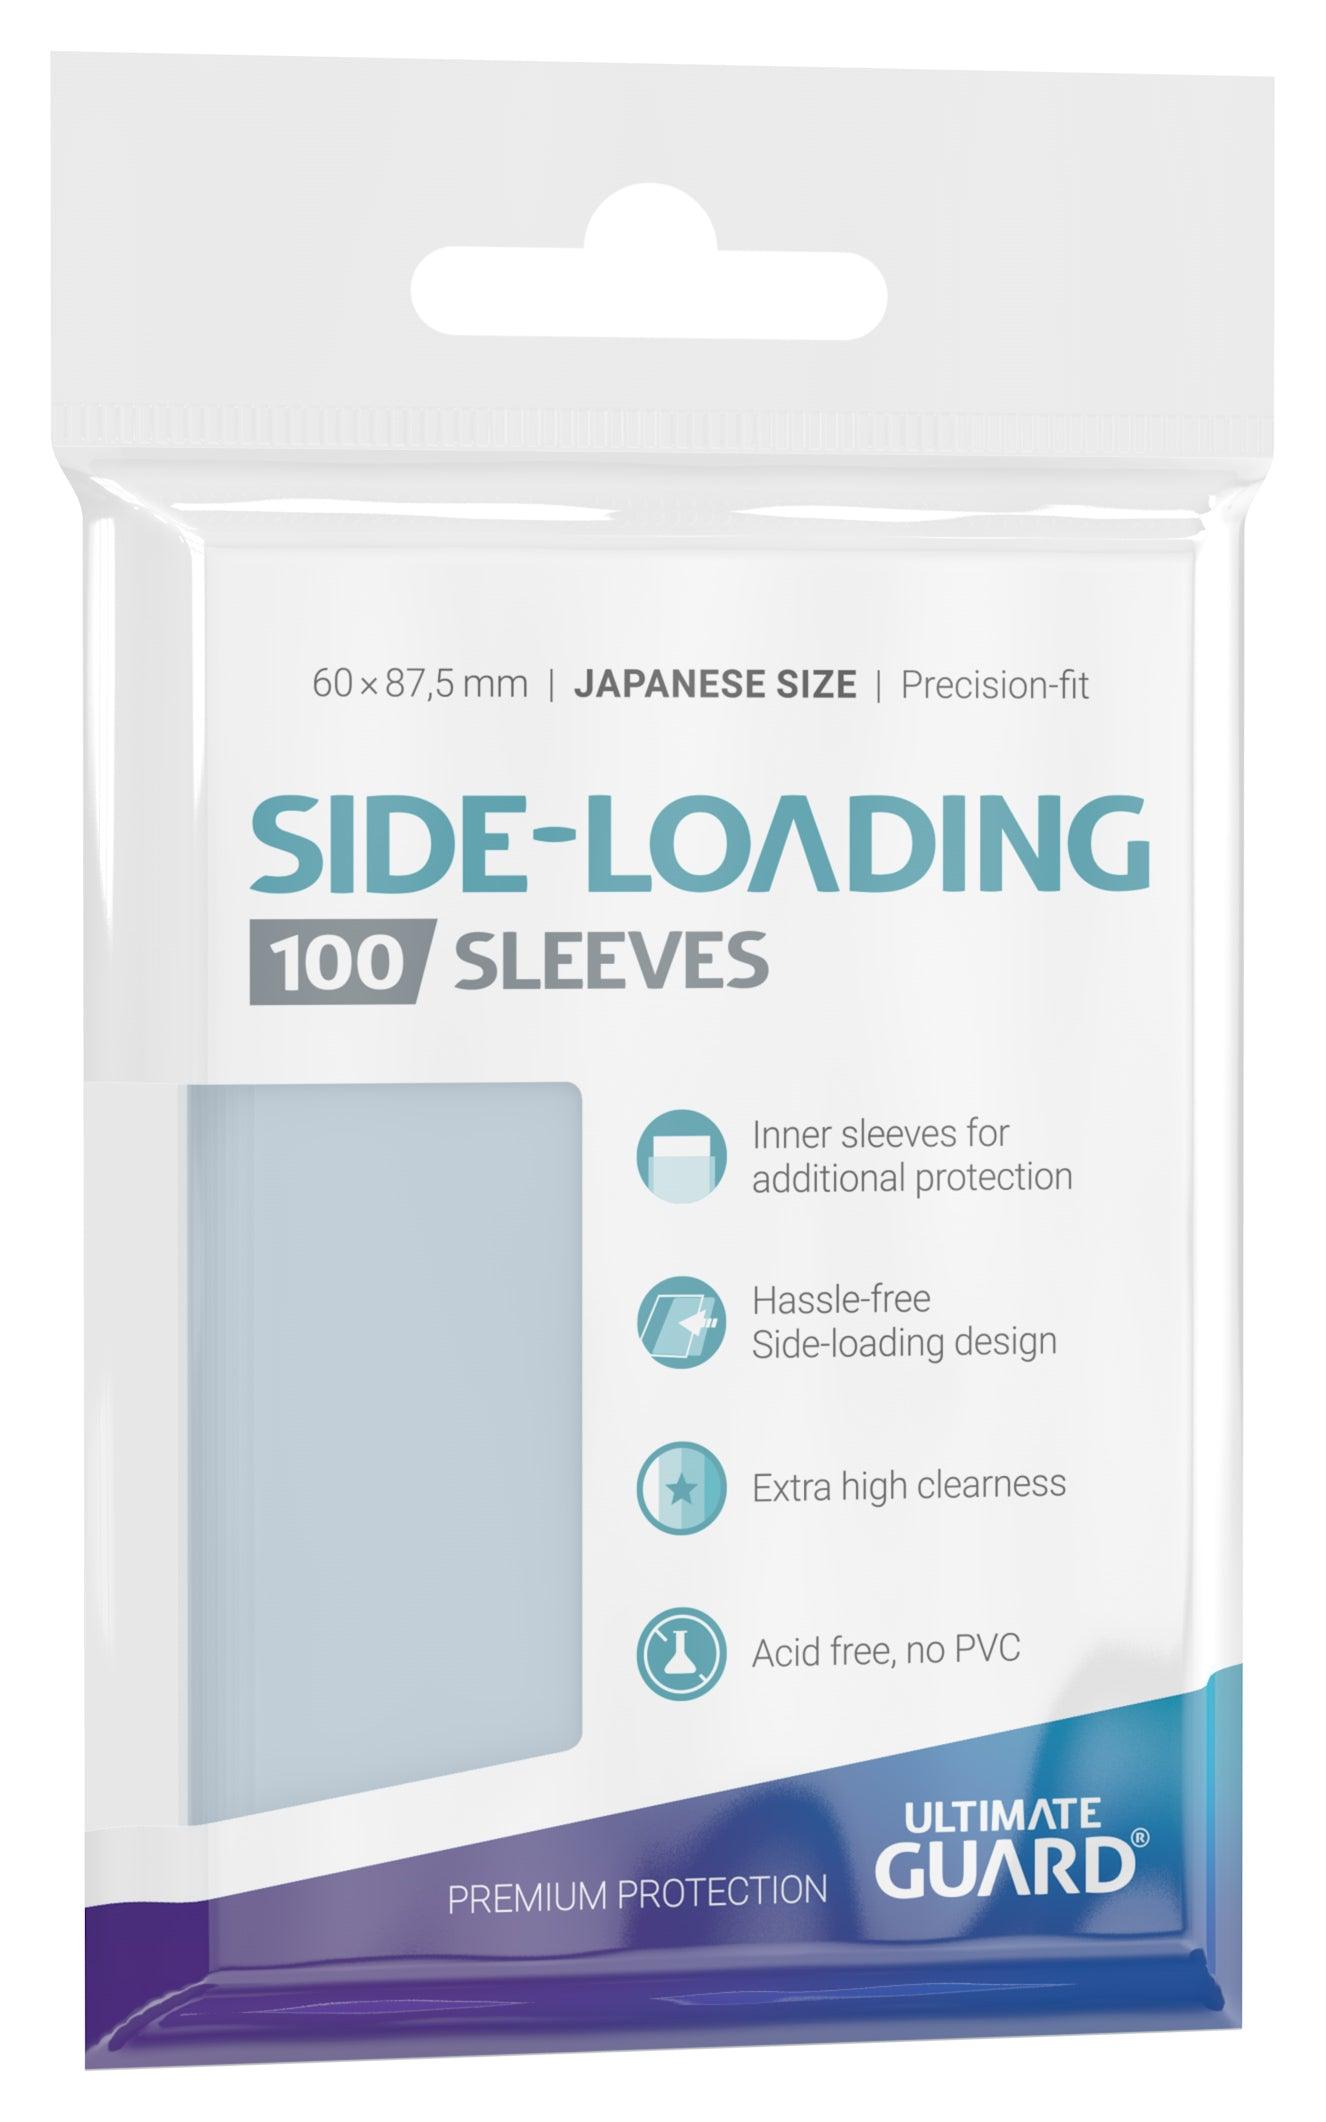 ULTIMATE GUARD - Precise fit sleeves side-loading japanese size - Magic Dreams Store